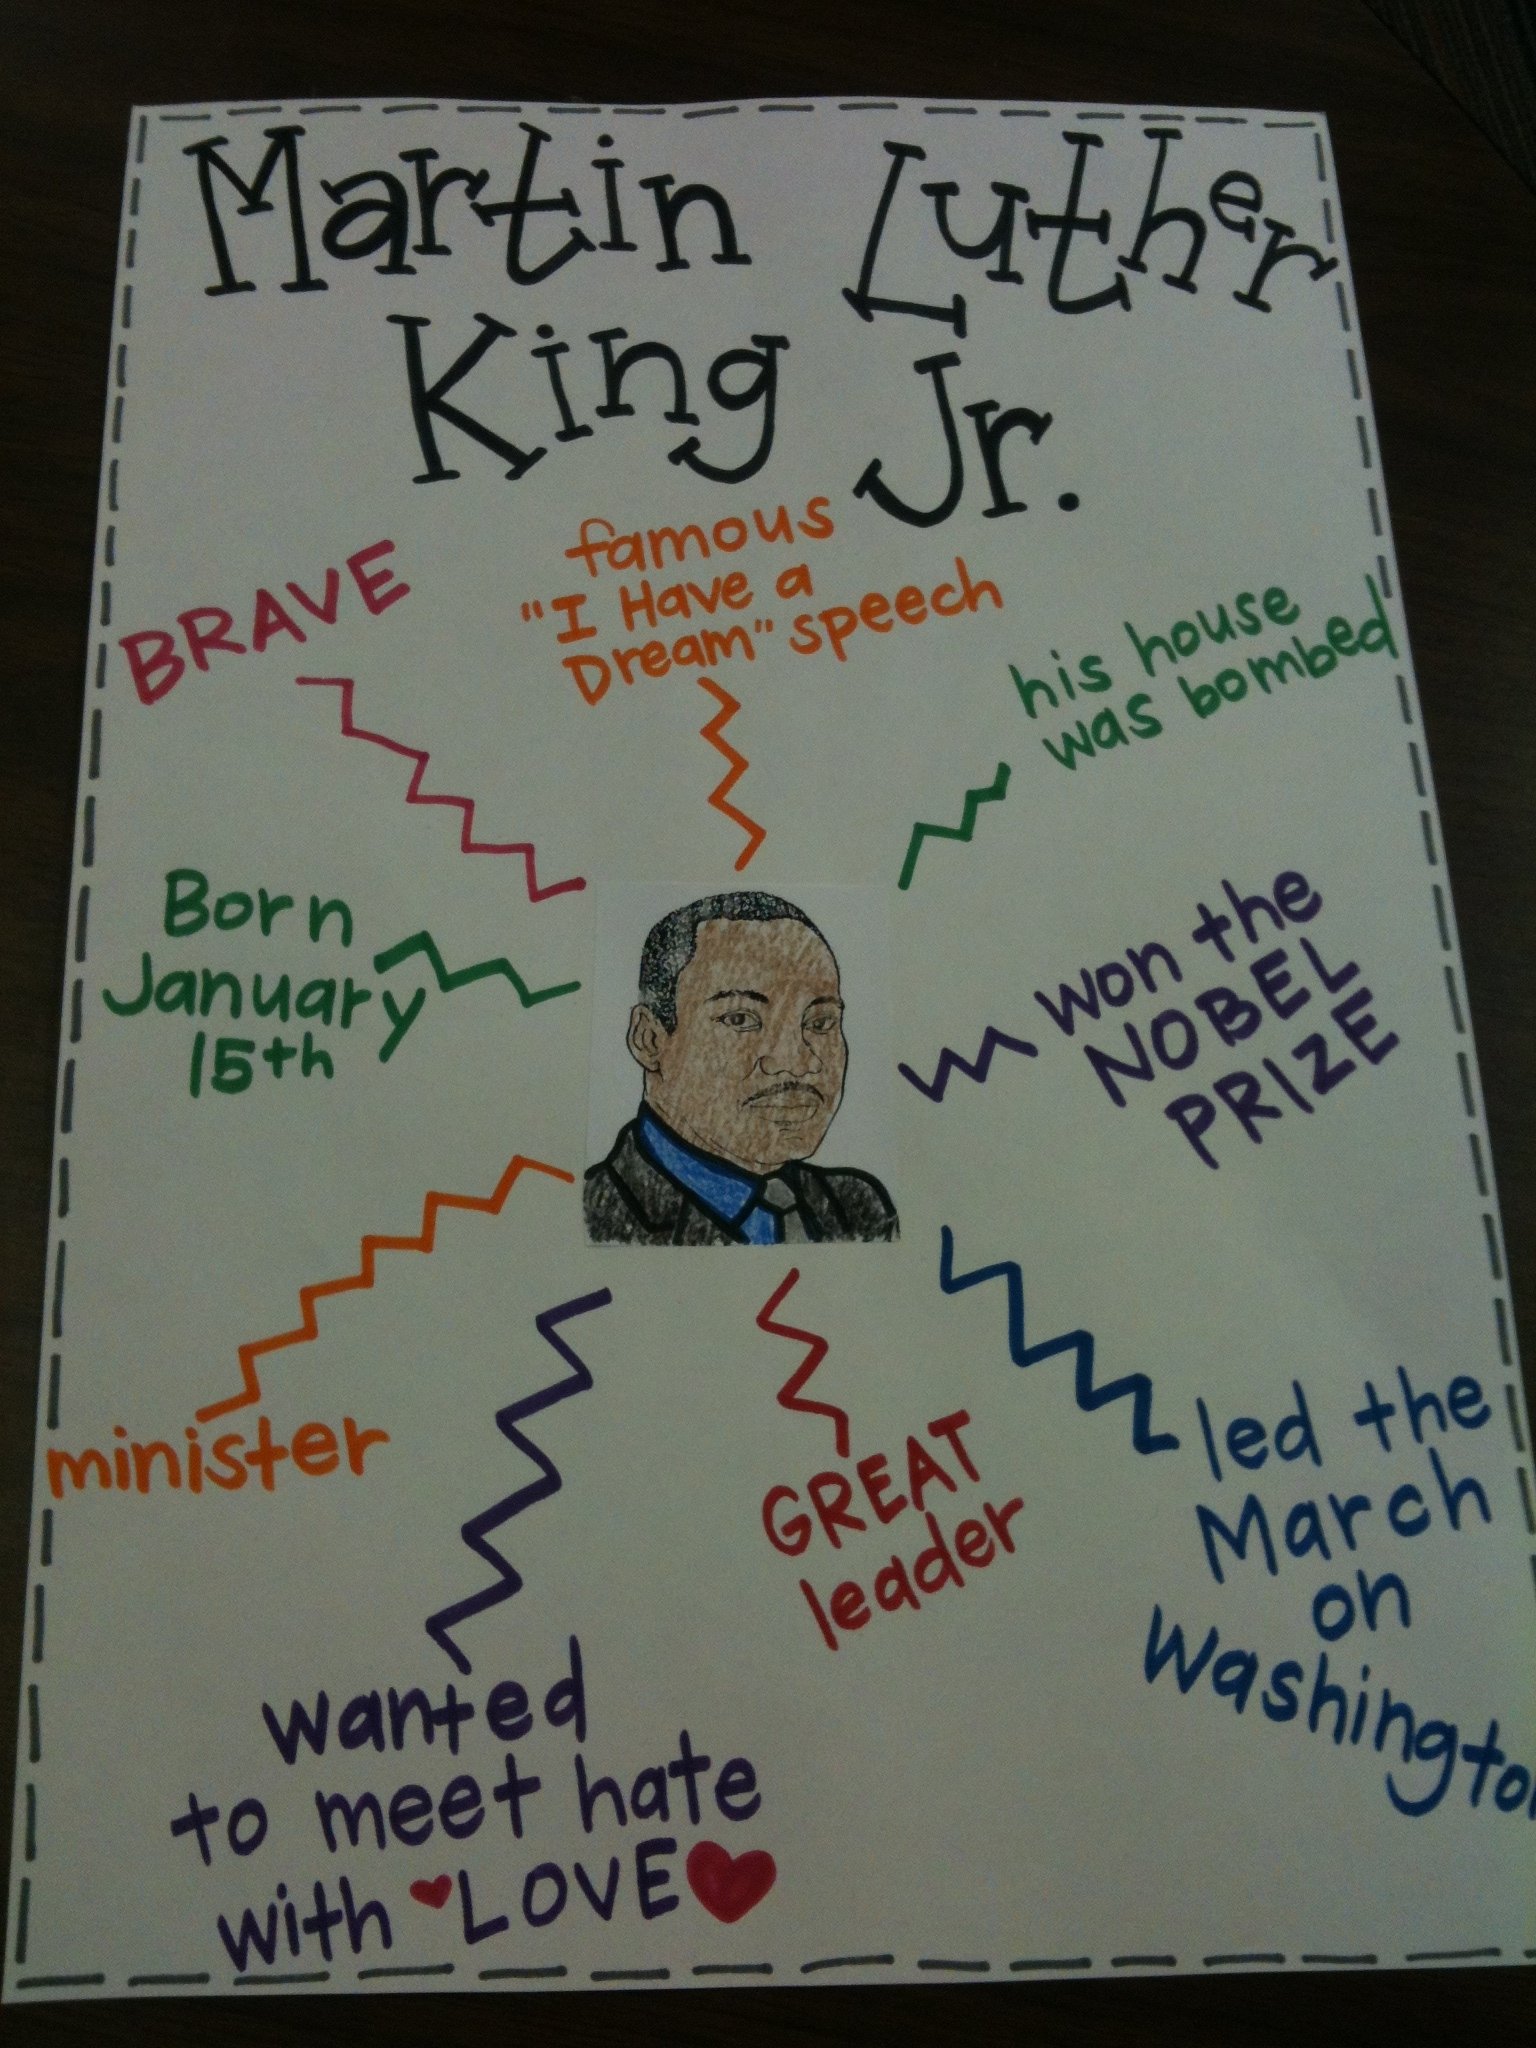 10 Perfect Martin Luther King Jr Project Ideas martin luther king jr im saving this because it reminds me of a 2022